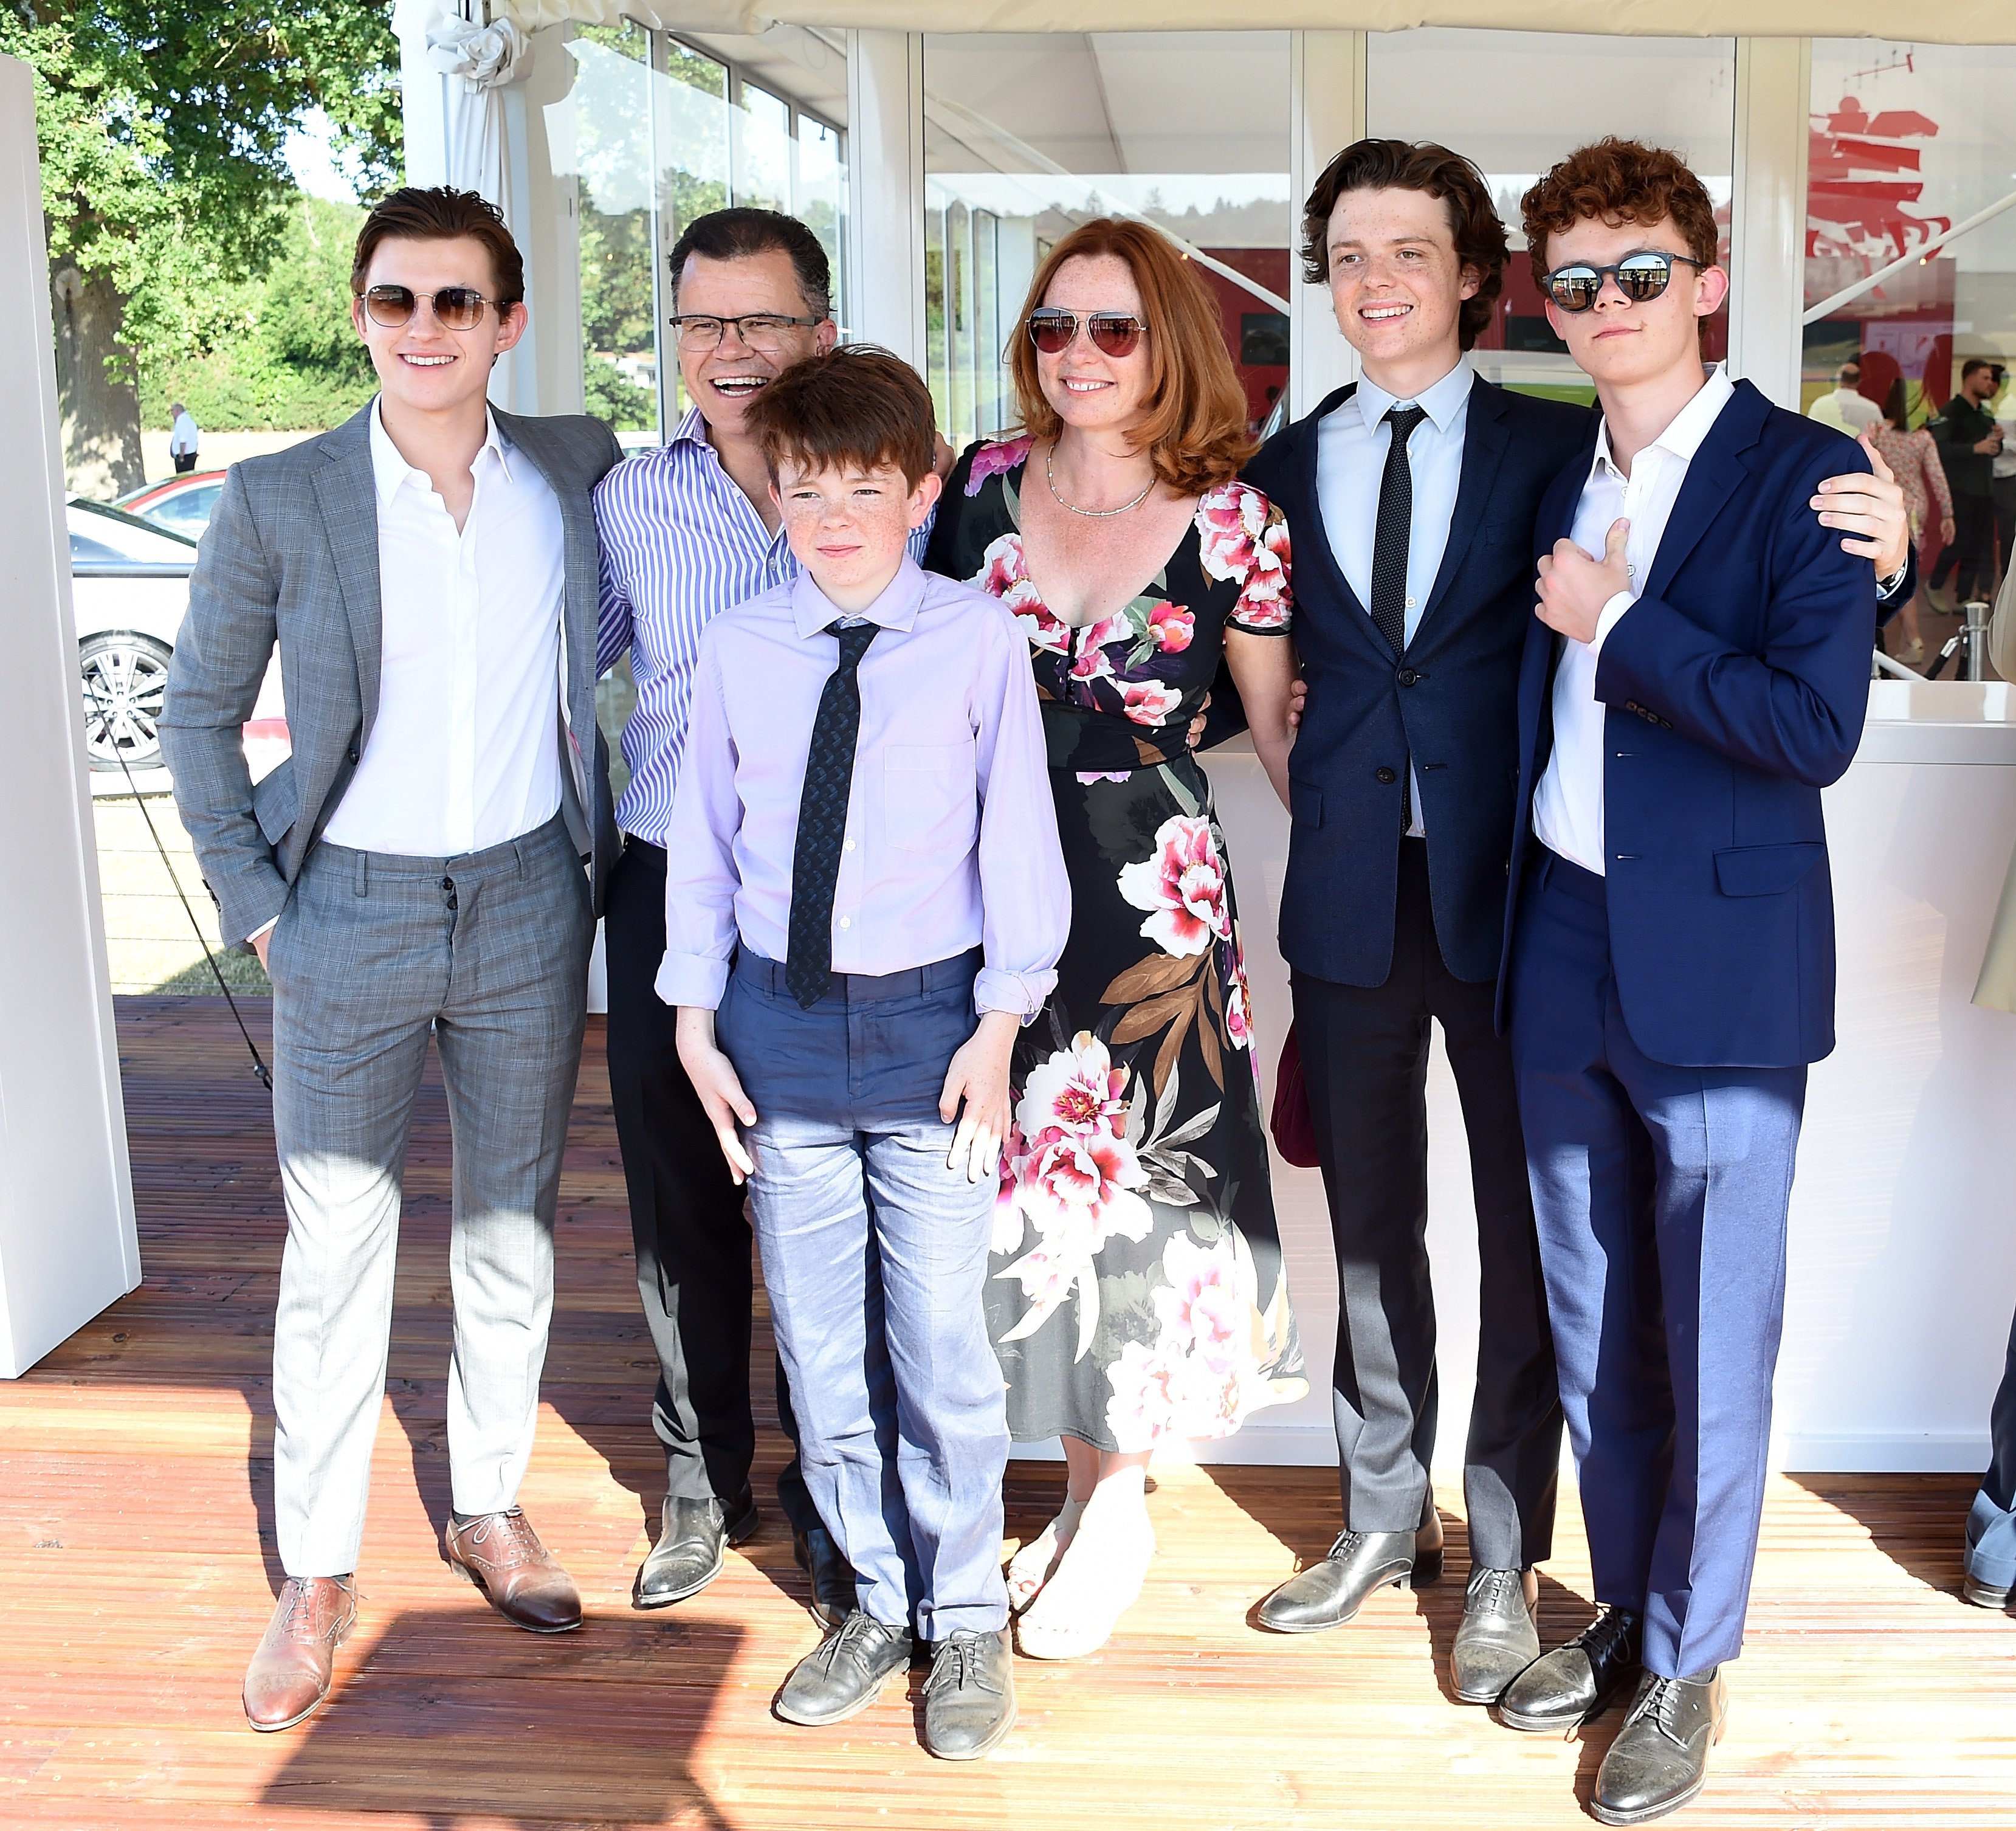 Tom Holland, Dominic Holland, Paddy Holland, Nicola Holland, Sam Holland, and Harry Holland at the Audi Polo Challenge on June 30, 2018 | Source: Getty Images